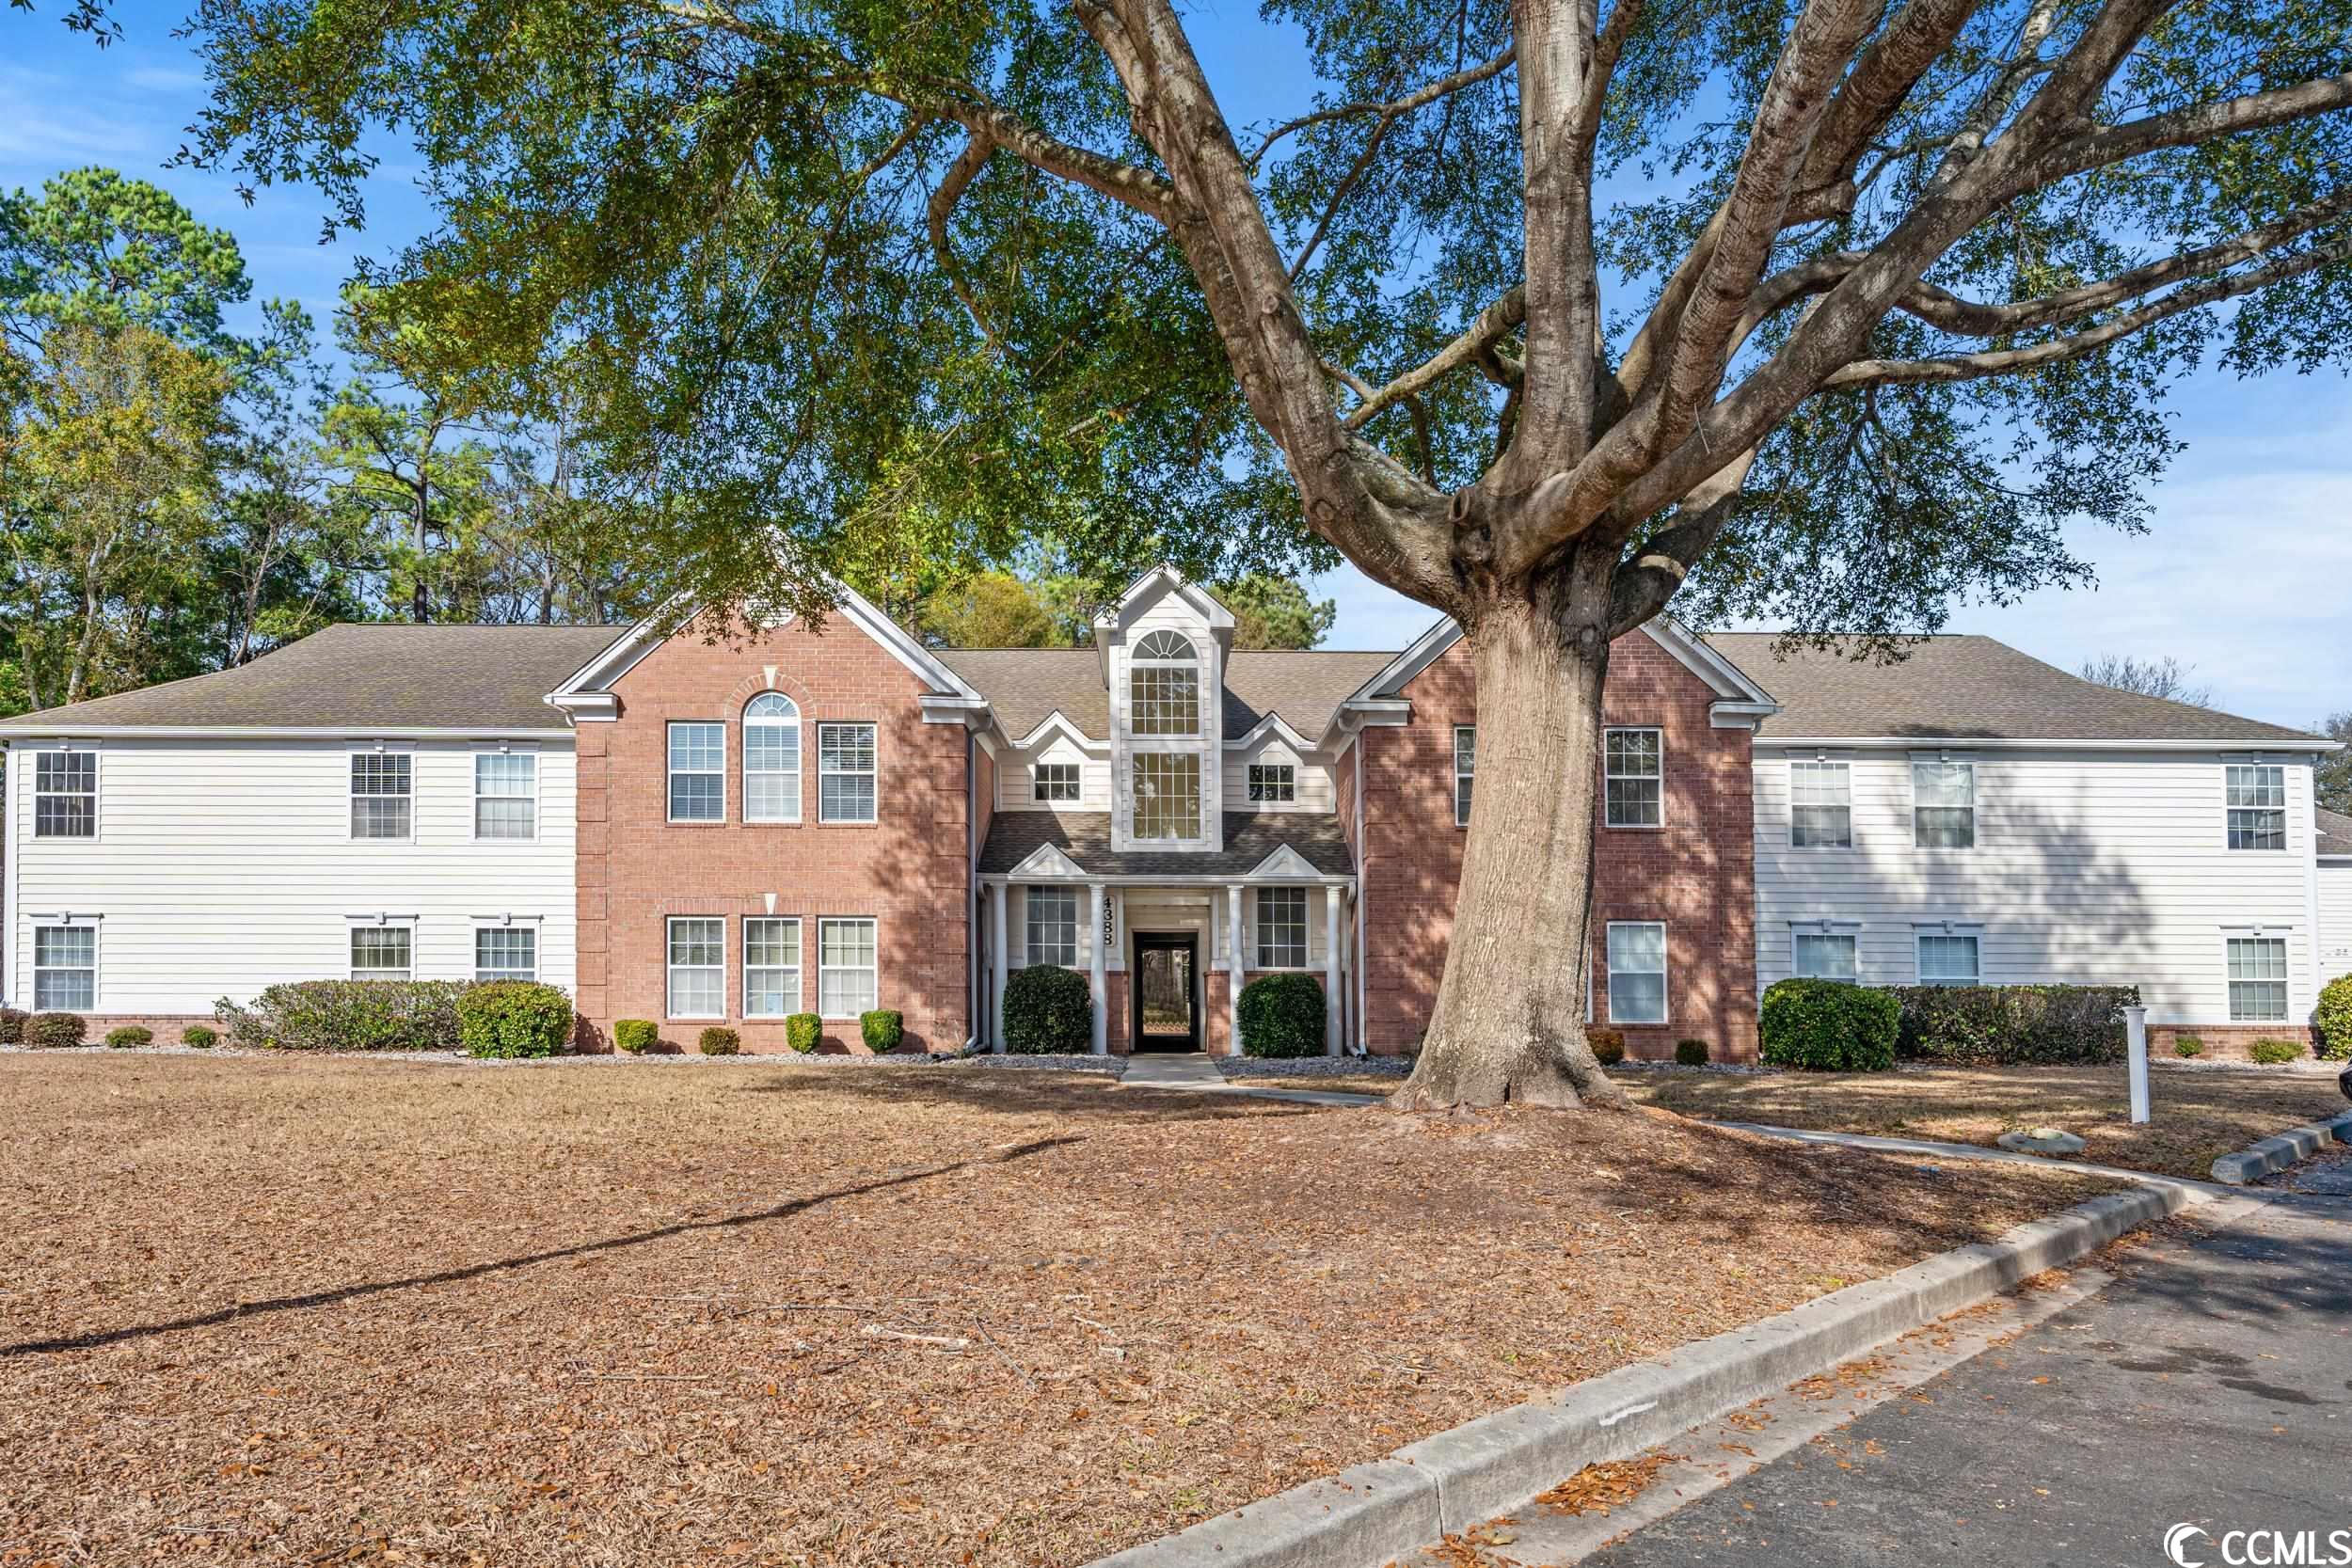 amazing and rare opportunity to own a 3 bedroom 2 bath first-floor condo in murrells inlet! upon entering the unit you are greeted by a wonderful open floor plan which extends into a light and bright carolina room complete with a decorative shelve above the windows.  the kitchen boasts beautiful white cabinets, and a large walk-in pantry. the large dining area features a beautifully lit custom cabinet perfect for displaying your decorative items and storing extra dishes.  the primary bedroom features a beautiful shiplap wall and offers a large walk-in closet. relax after a long day in the amazing garden tub or wash away the sand in the walk-in shower, both to be found in the primary bath.  the additional two bedrooms are spacious and share a roomy bathroom. mentionable upgrades include crown molding throughout, ceiling fans in every bedroom and living room as well as chair railing in the dining area.  amenities include pool, bike racks, tennis, clubhouse and half court basketball.  located just a short bike ride  to the marshwalk, and only a couple of miles to huntington beach state park or brookgreen gardens the opportunities to enjoy entertainment and beach life are endless!